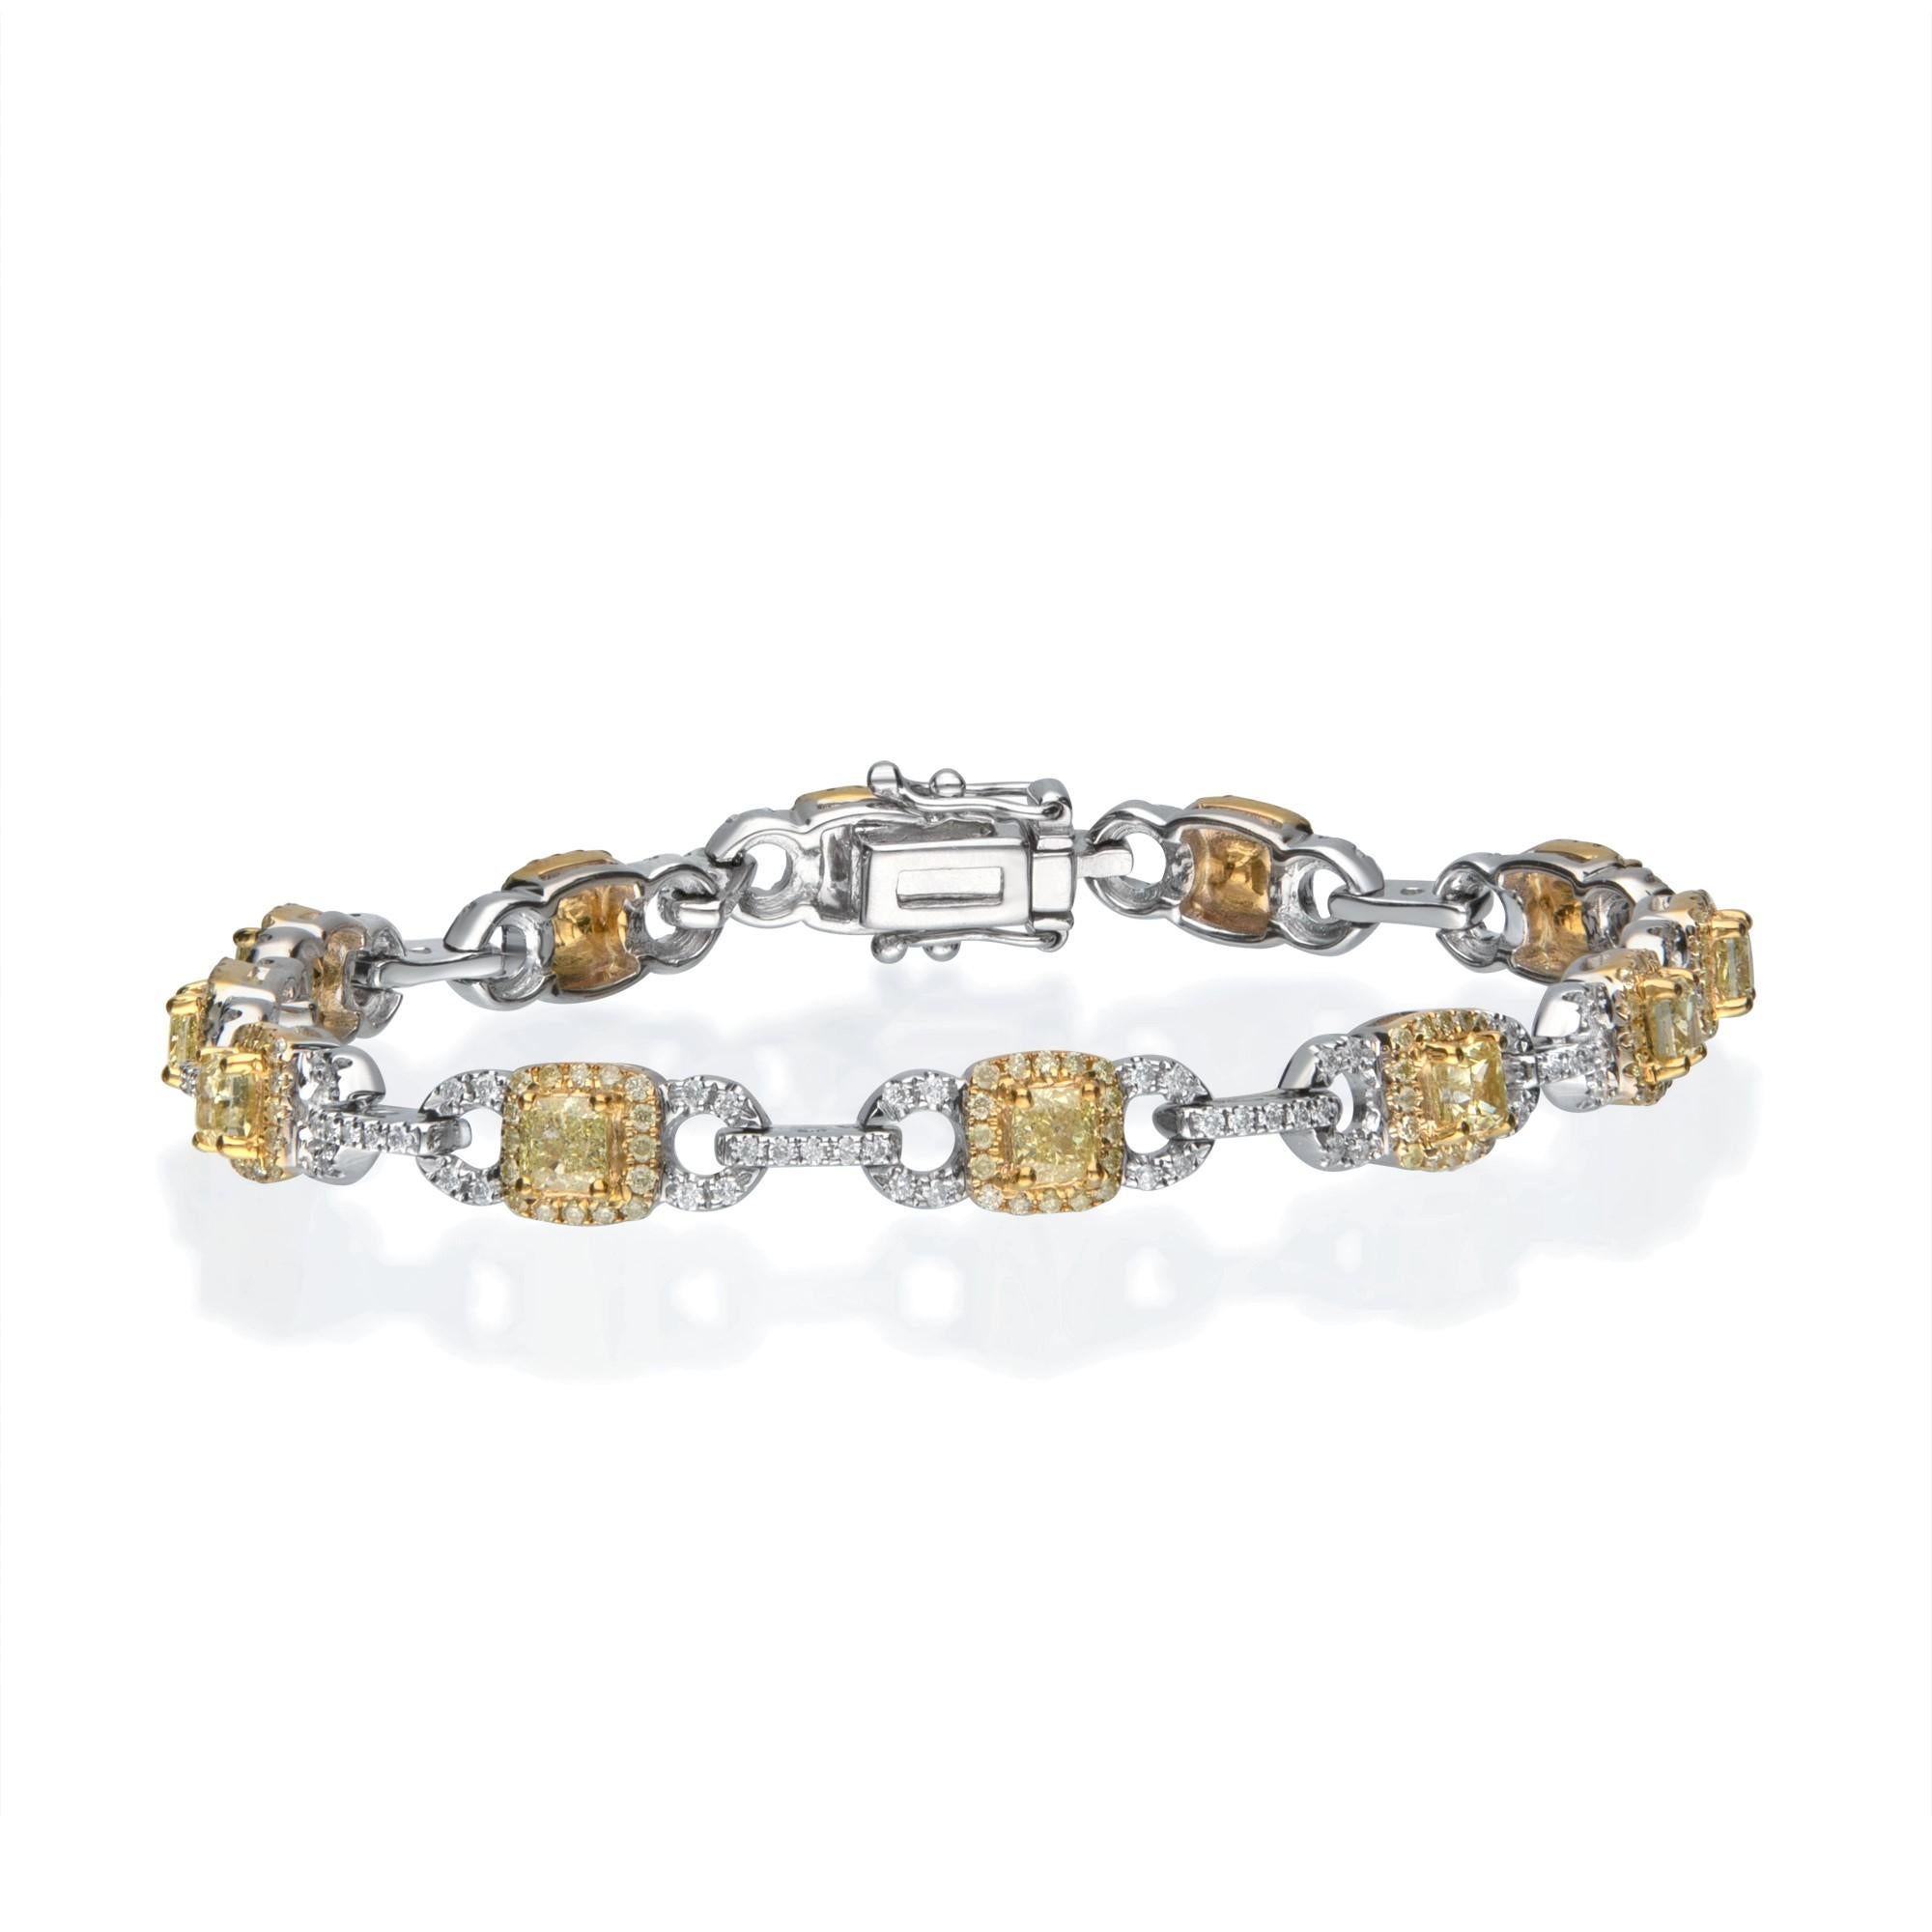 Decorate yourself in elegance with this Bracelet is crafted from 14-karat Two Tone Gold by Gin & Grace. This Bracelet is made up of Round-cut White Diamond (348 Pcs) 1.30 Carat, Mix Yellow Diamond (12 pcs) 1.86 carat. This Bracelet is weight 13.28